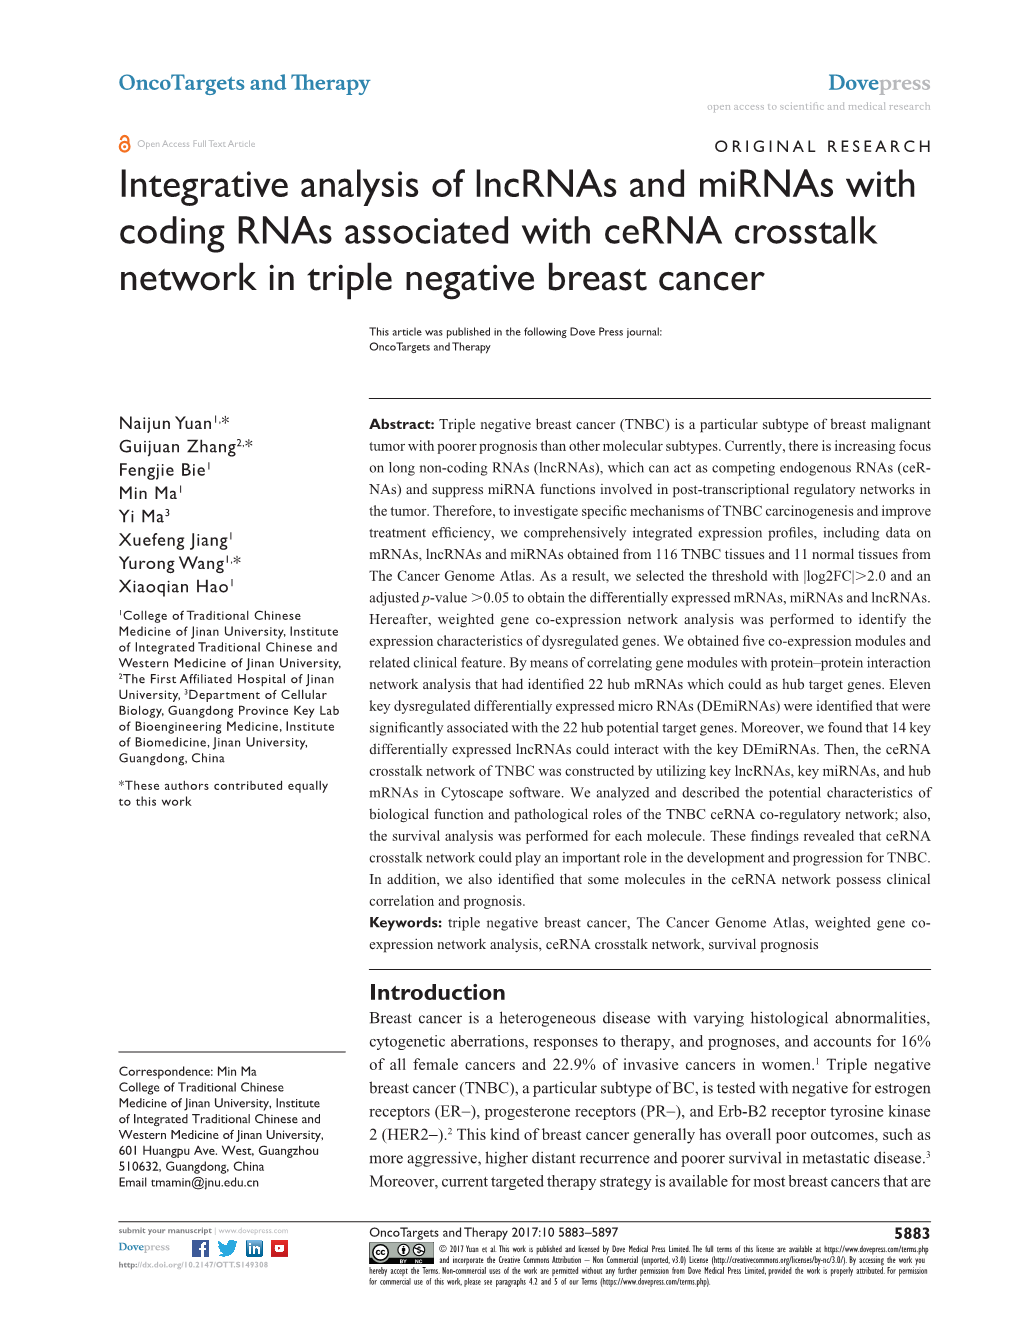 Integrative Analysis of Lncrnas and Mirnas with Coding Rnas Associated with Cerna Crosstalk Network in Triple Negative Breast Cancer